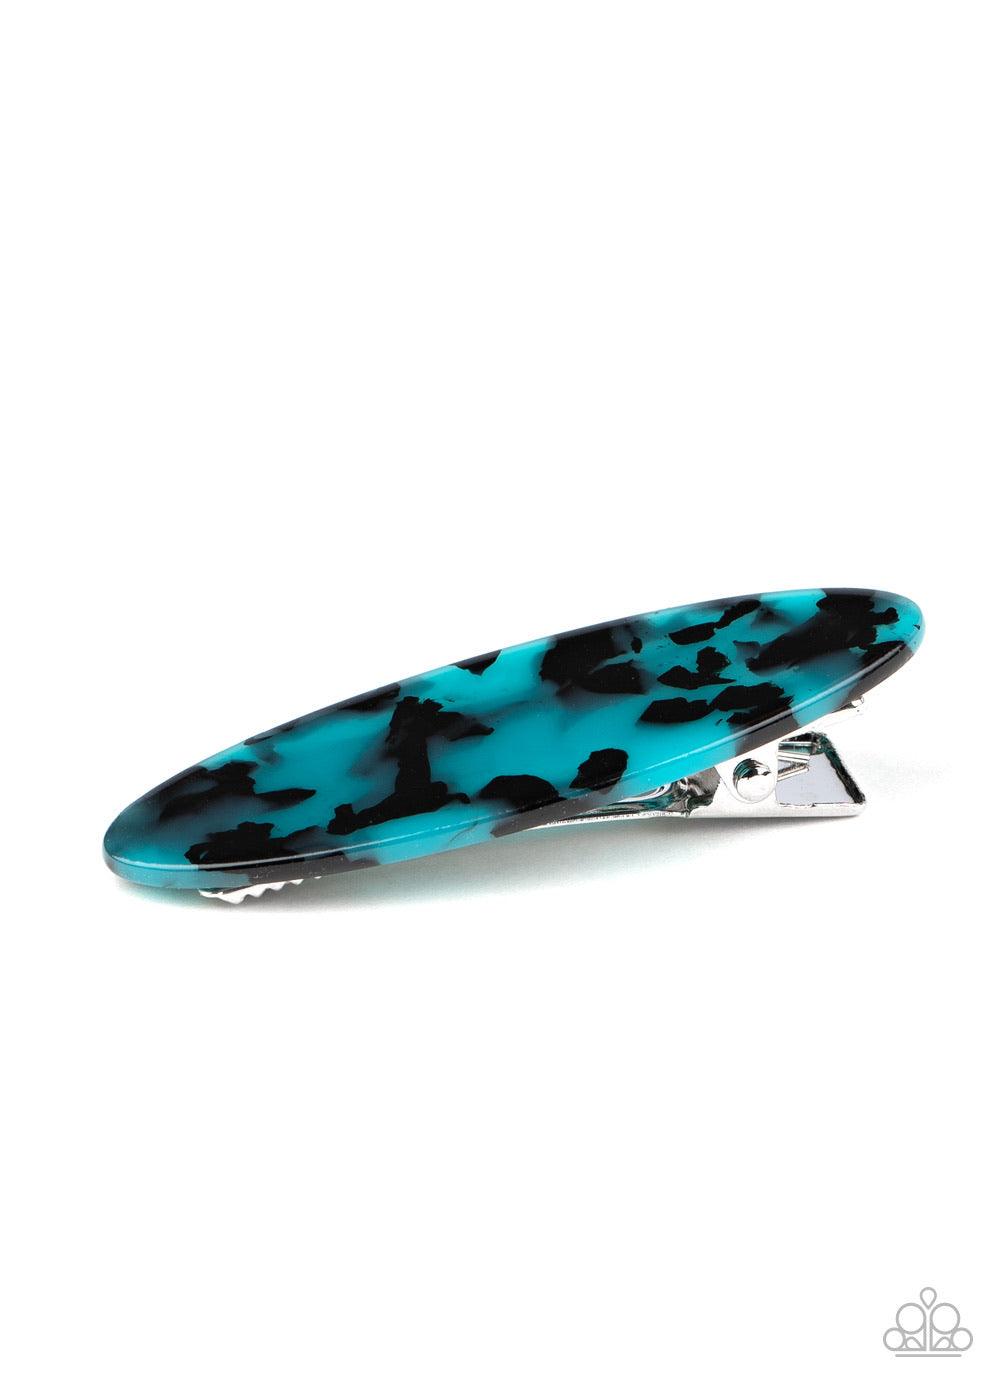 Paparazzi Accessories Hype Girl - Blue Featuring a blue and black tortoise shell finish, an oval acrylic frame pulls back the hair for a retro look. Features a standard hair clip on the back. Sold as one individual hair clip. Hair Accessories